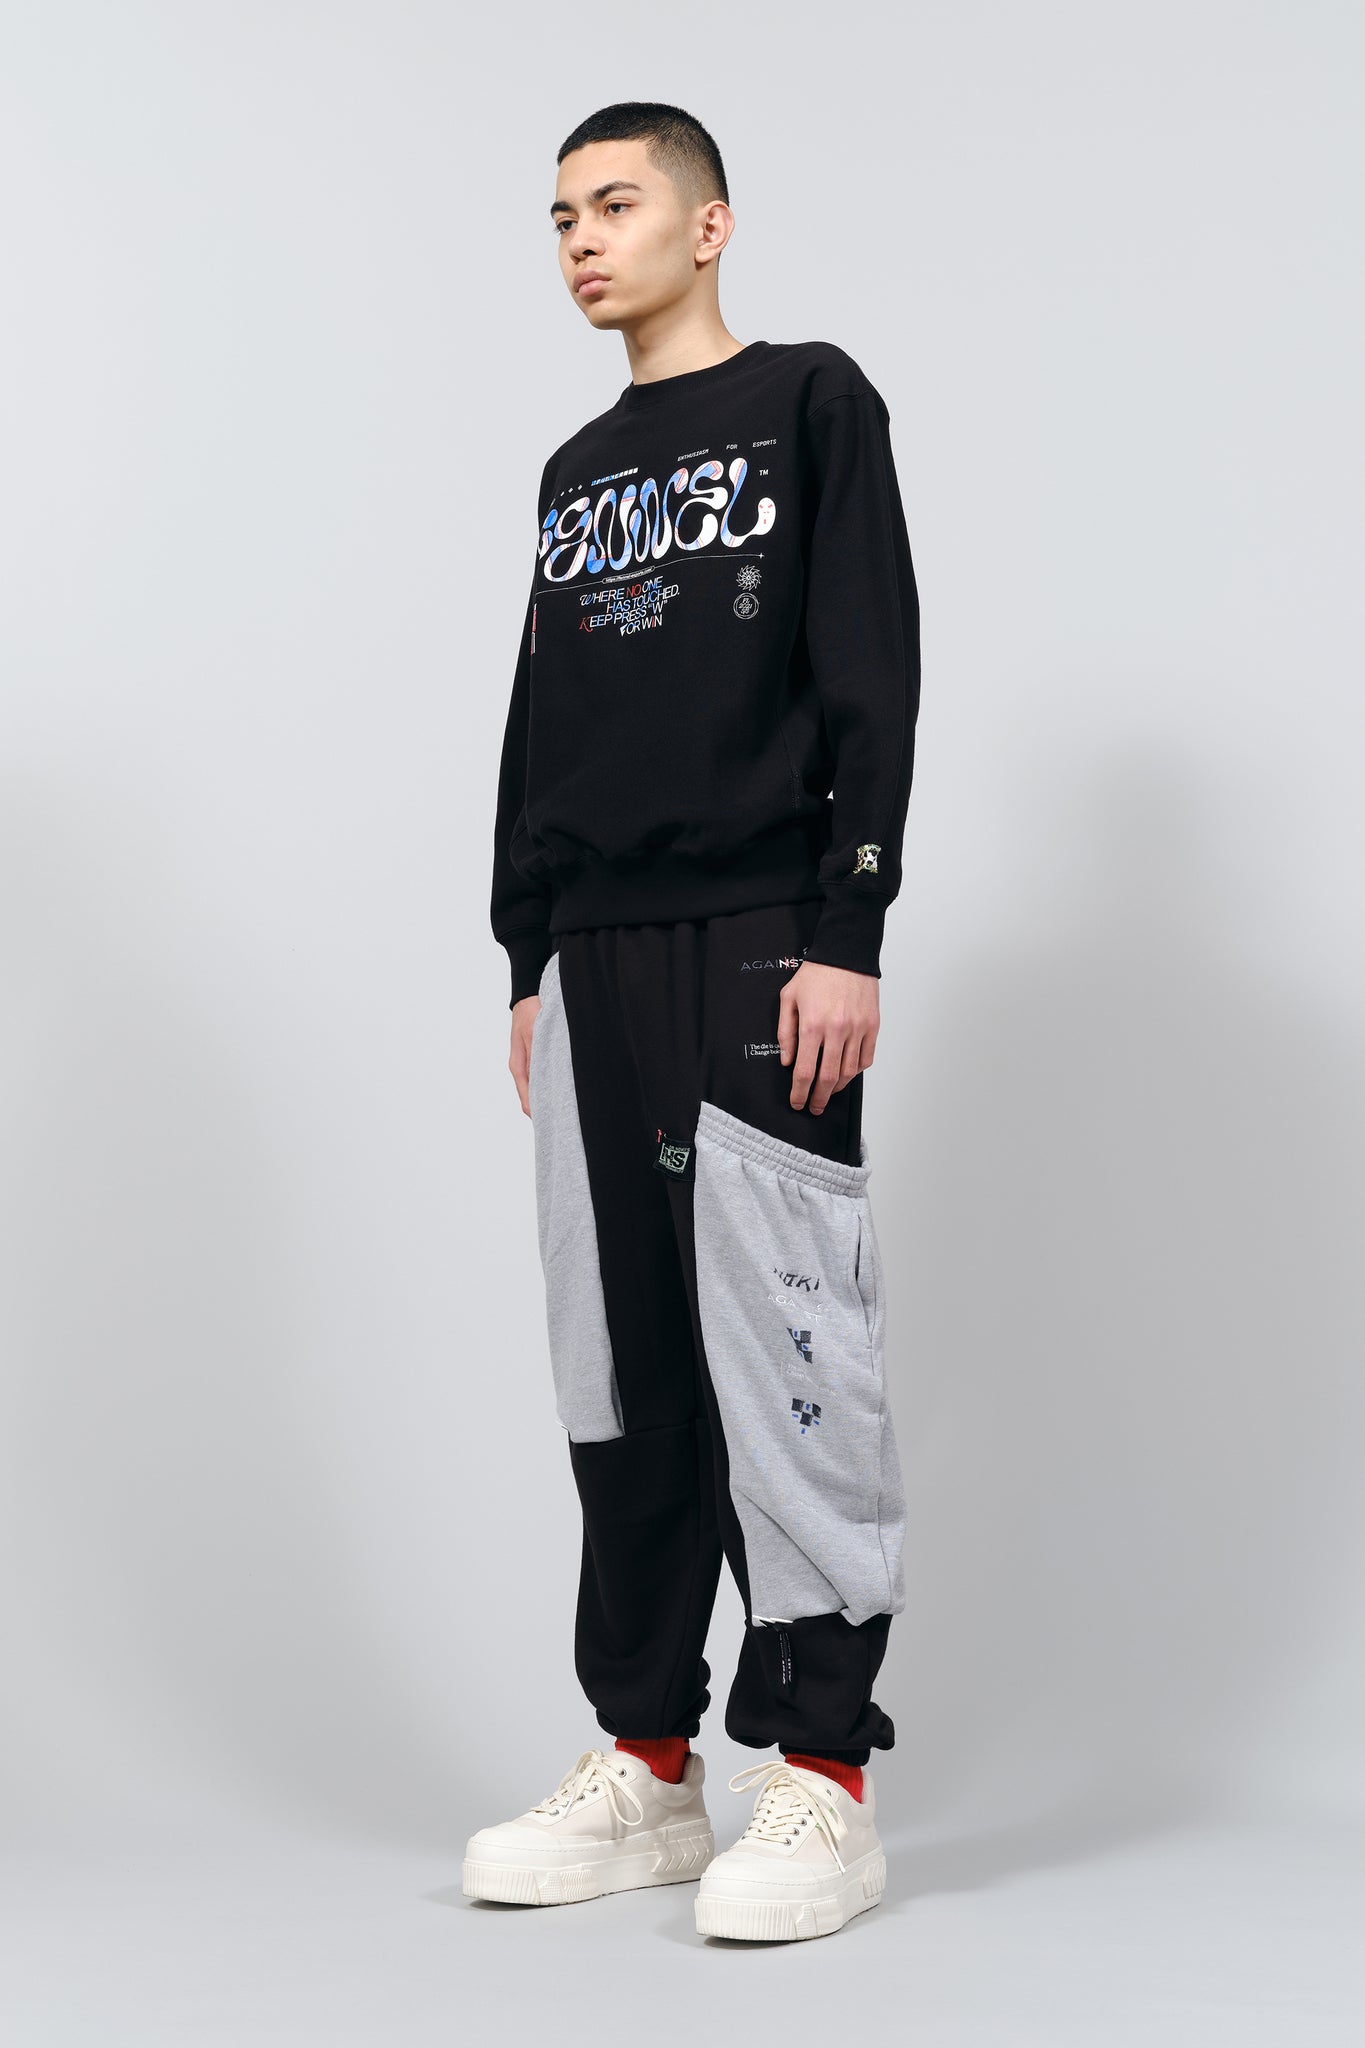 BLACK JOGGERS WITH OVERSIZED CARGO POCKETS